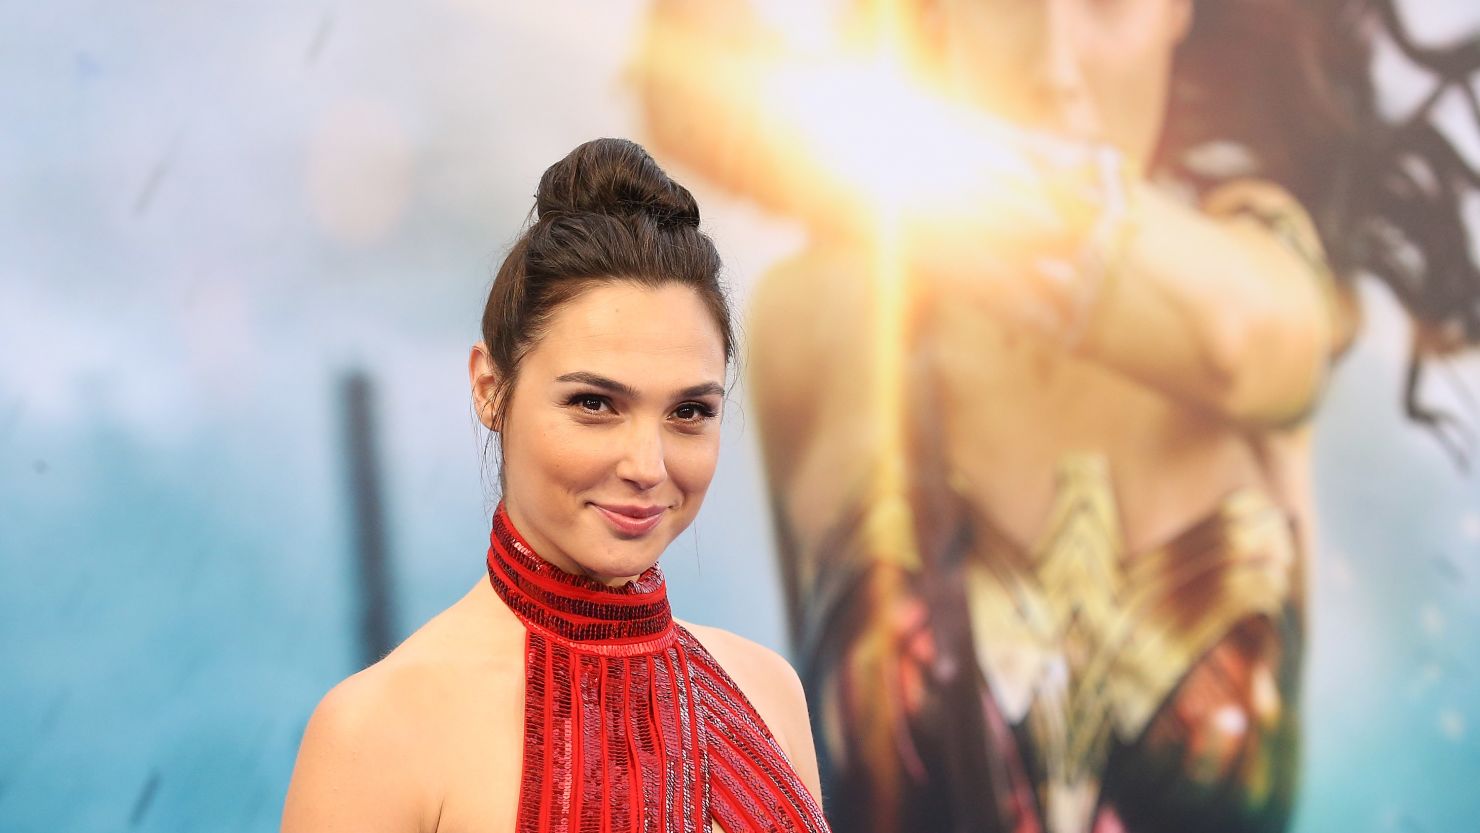 Gal Gadot at the "Wonder Woman" premiere in 2017.